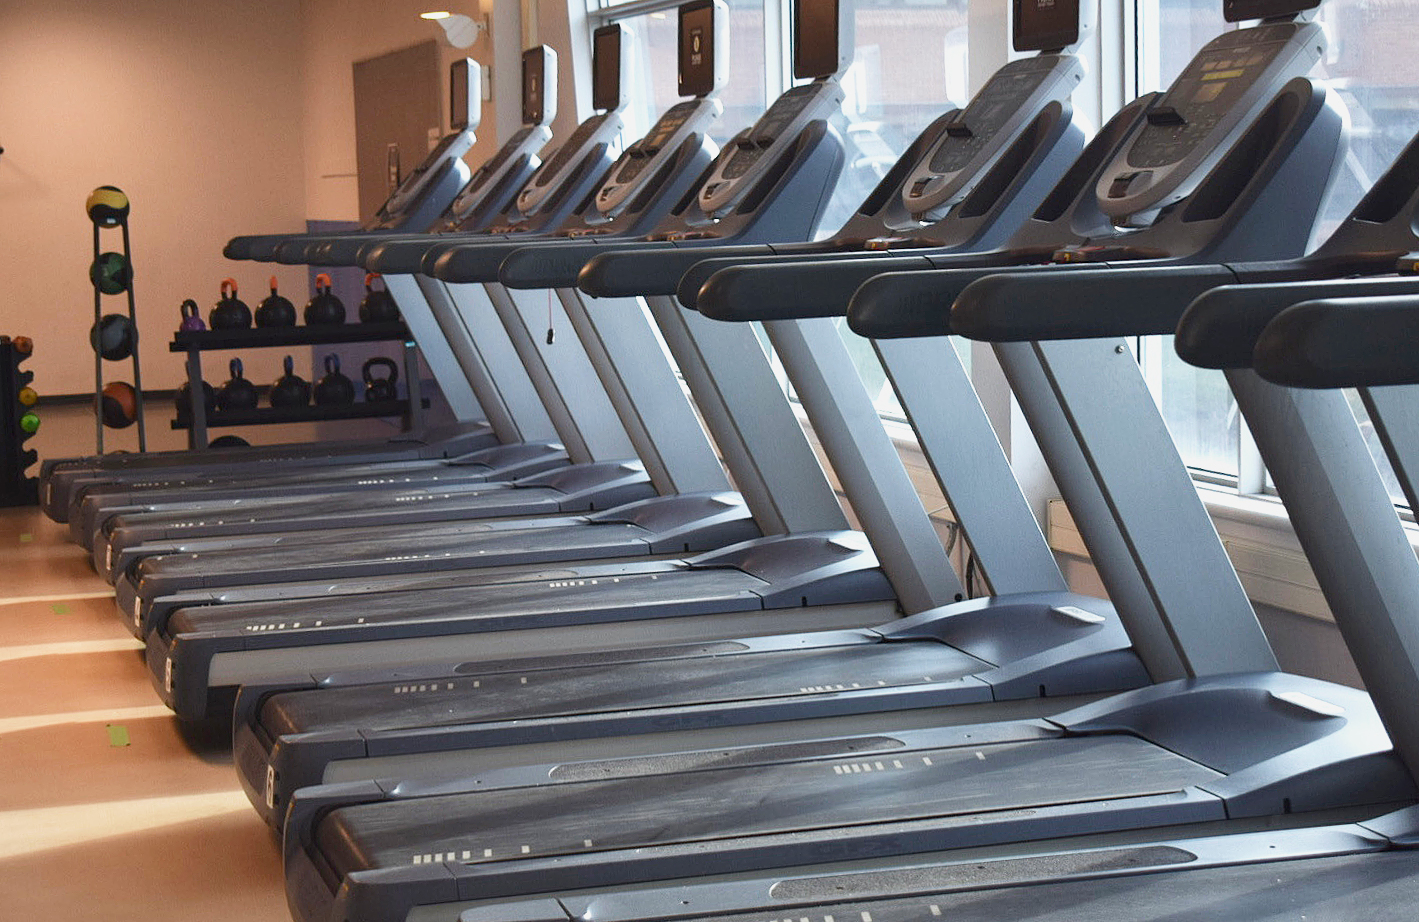 As of Nov. 9 students can now visit Algonquin's Fitness Zone.